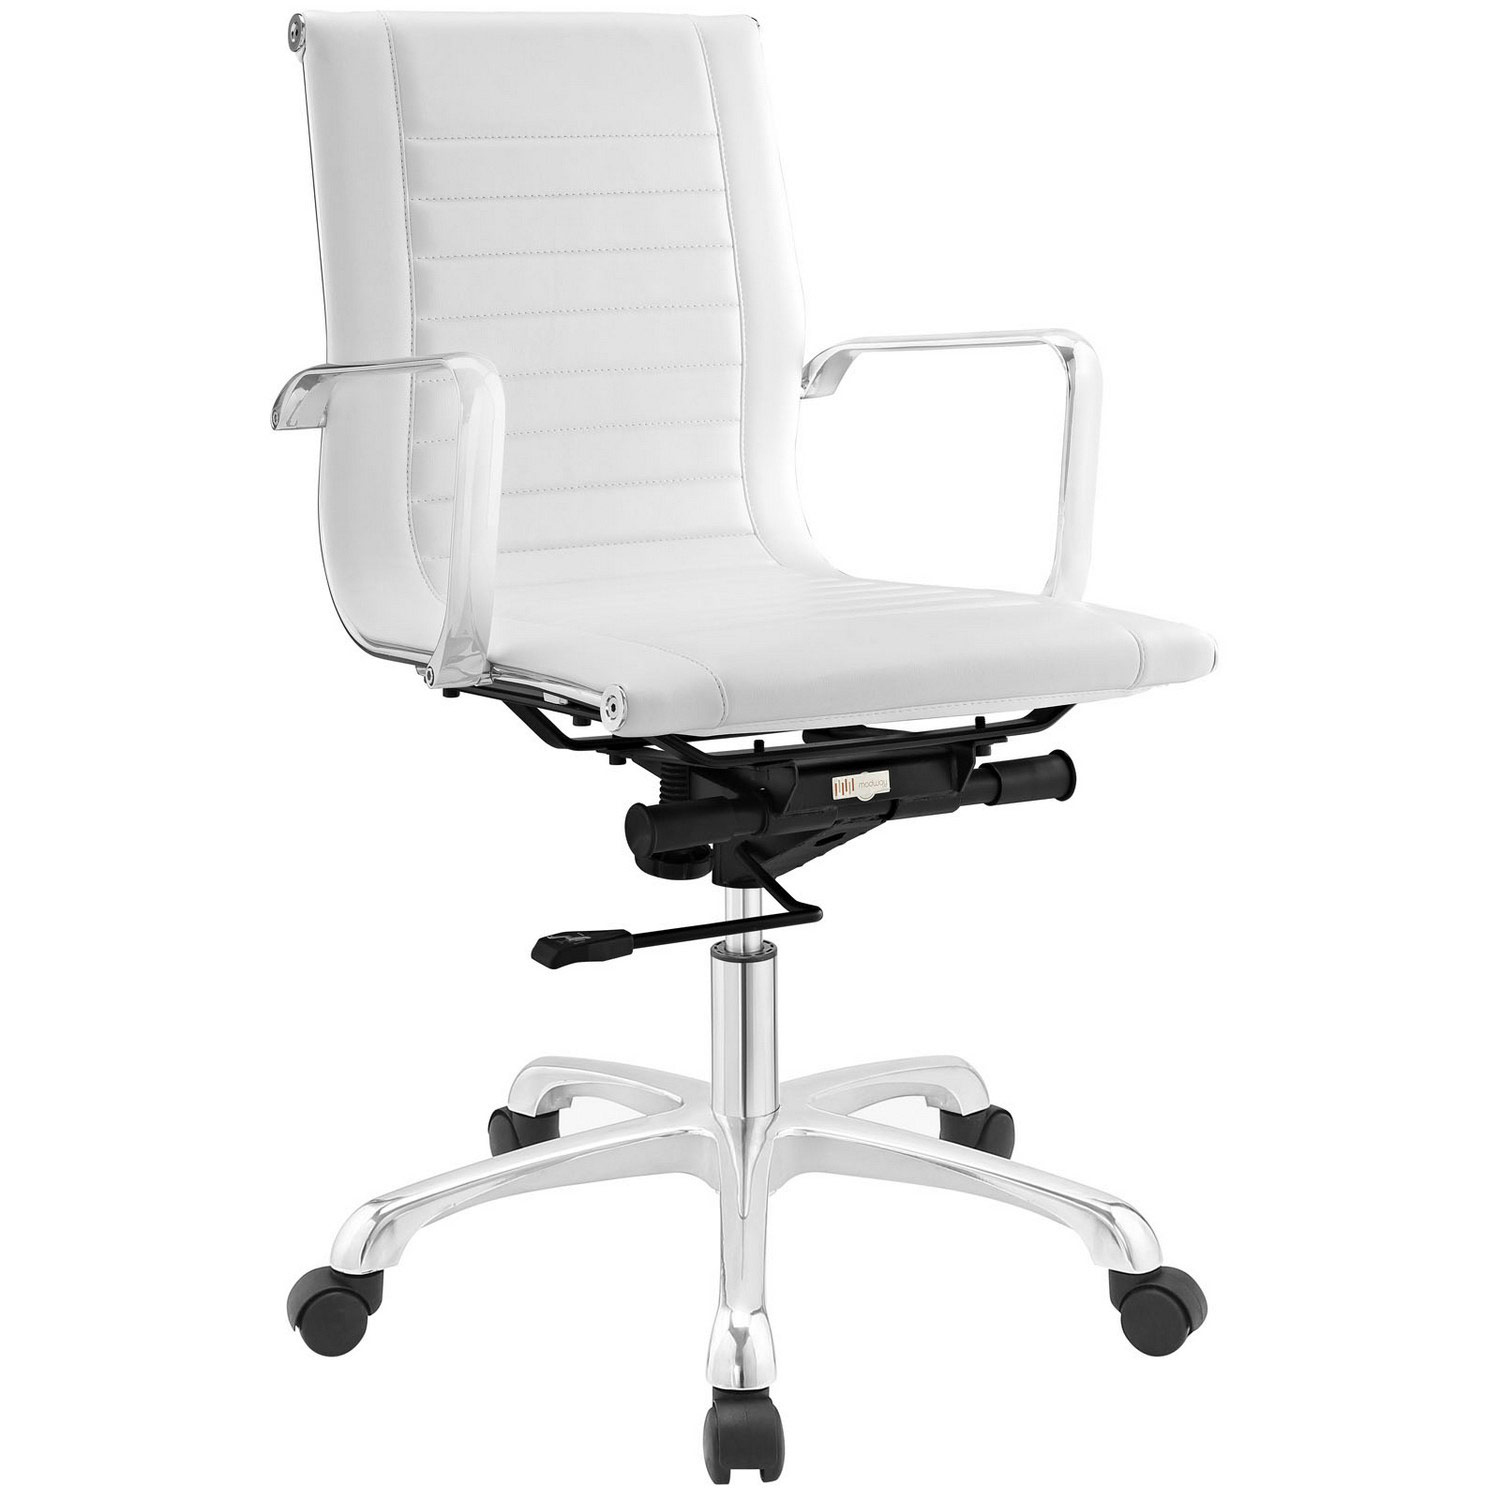 Modway Runway Mid Back Office Chair - White